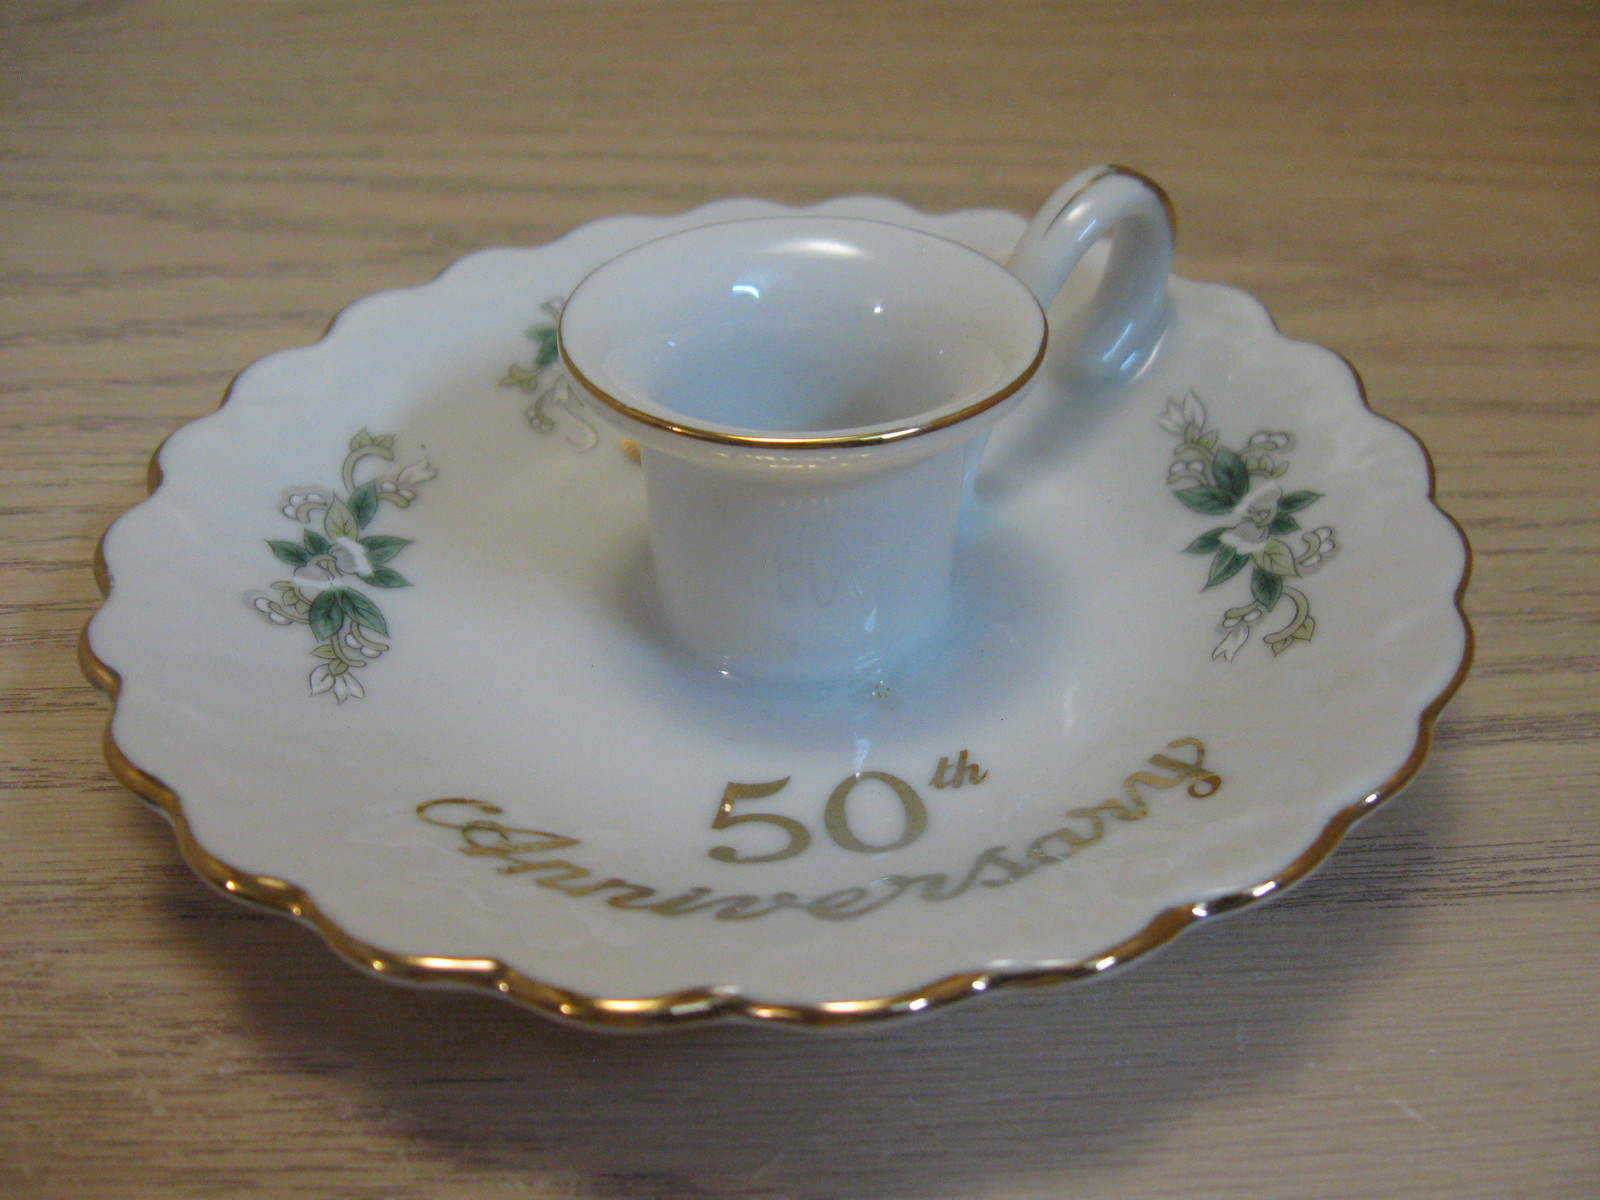 Primary image for Lefton Candle Stick Holder 50th Anniversary Flower & Bell Designs #01103